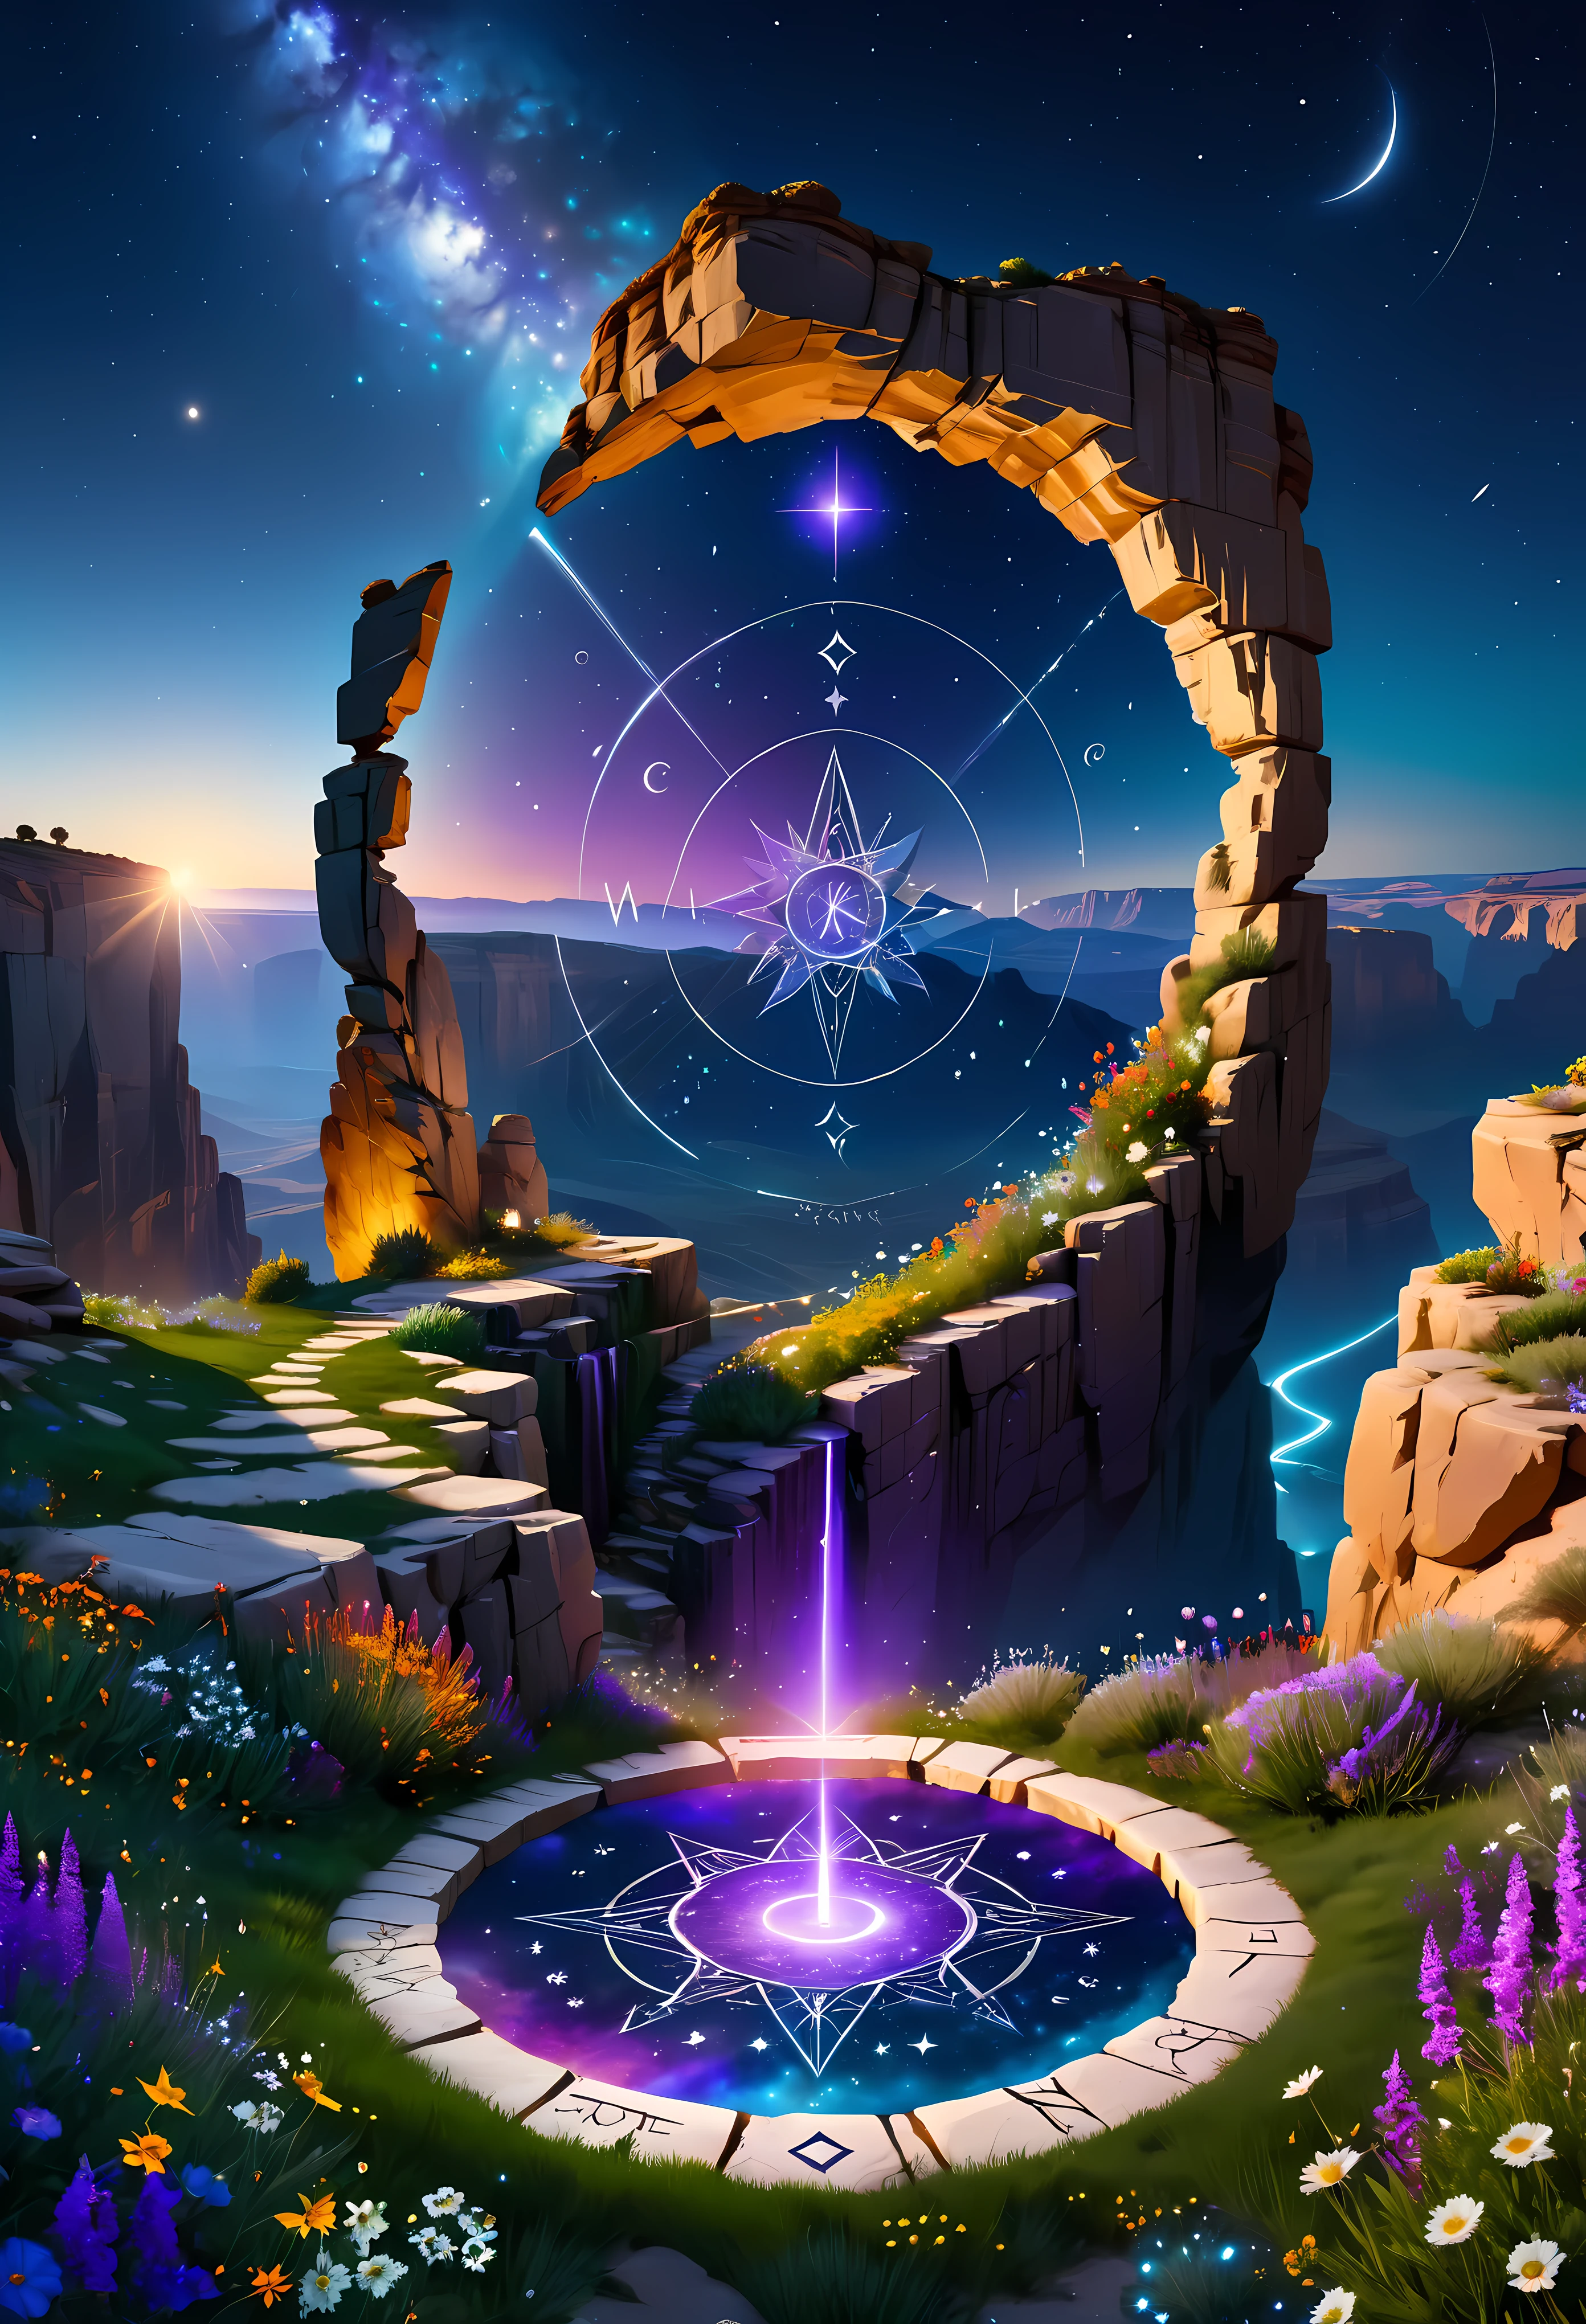 Towering steep and towering high magic circle in a cliff garden, wild flowers, asymmetric magic circle cliff canyon, ((magical inscription):1.2), (glowing runes), (glowing sigil), Coexistence with the natural environment, magic circle canyon night, clear night sky, meteors across, moonlight, extremely detailed, best quality, masterpiece, high resolution, Hyperrealistic, 8K, top-view,  high angle view, Violet Color Palette, Minimalism.